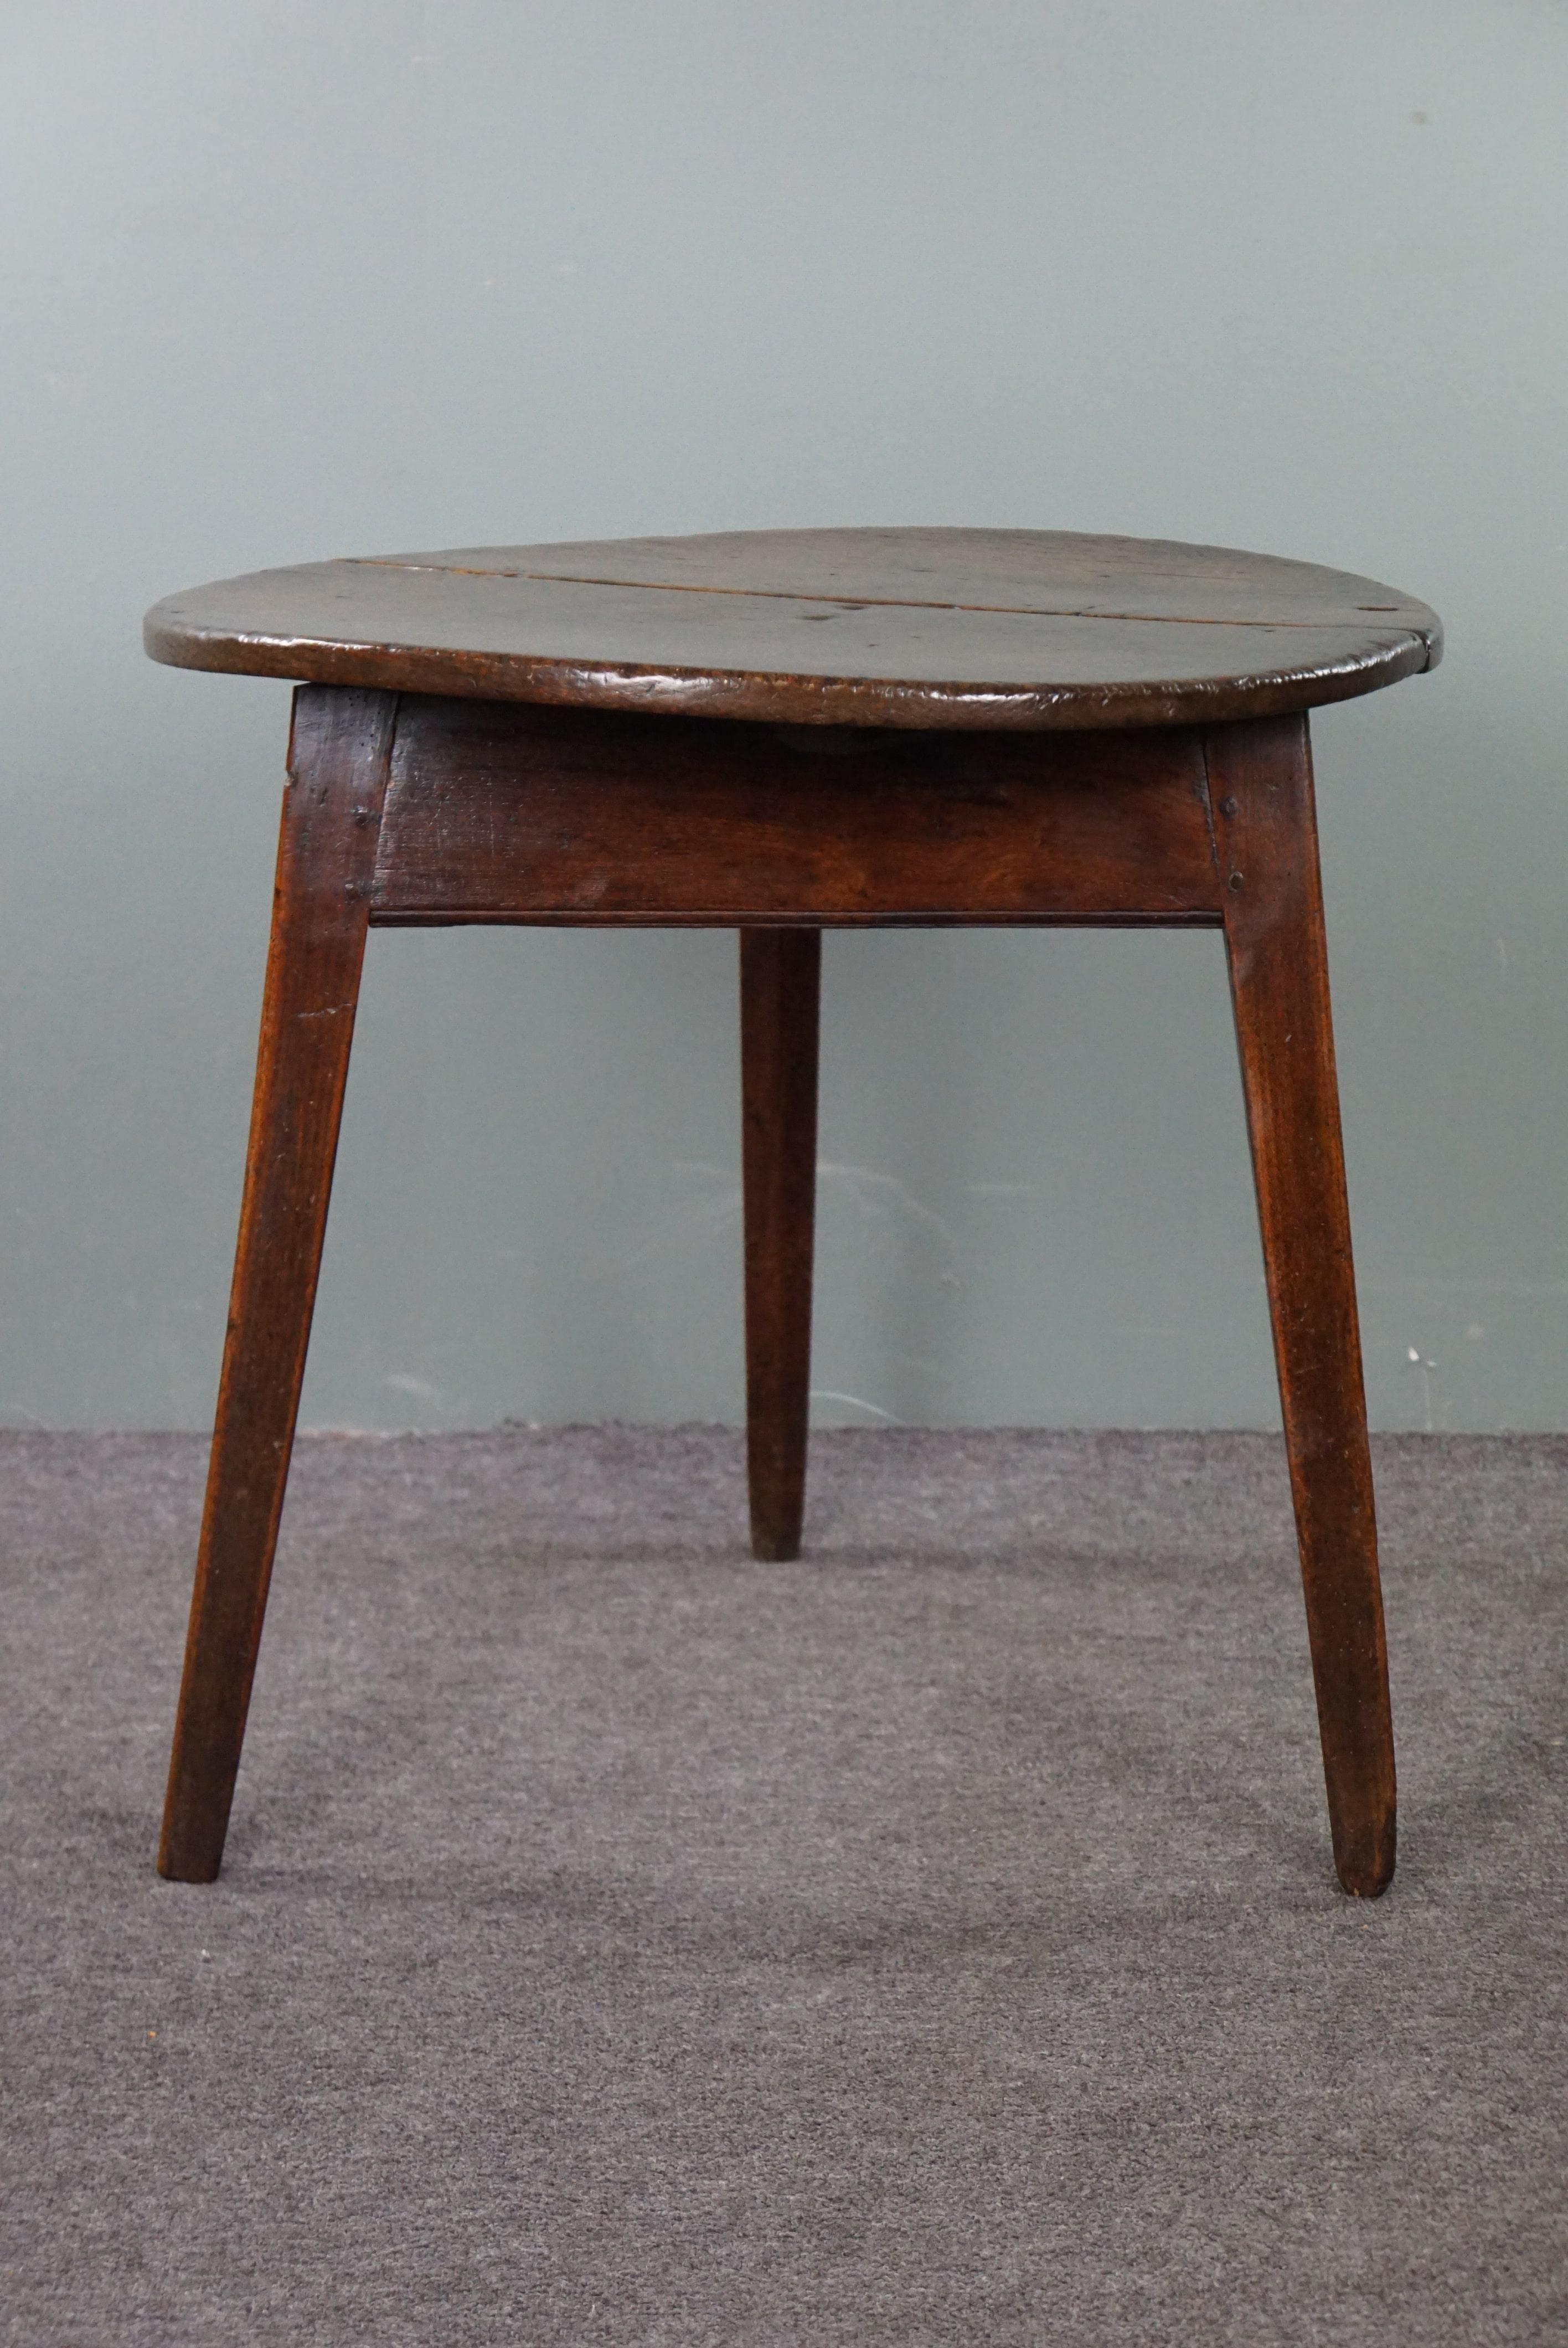 18th Century Antique 18th-century English cricket table/3-leg table For Sale